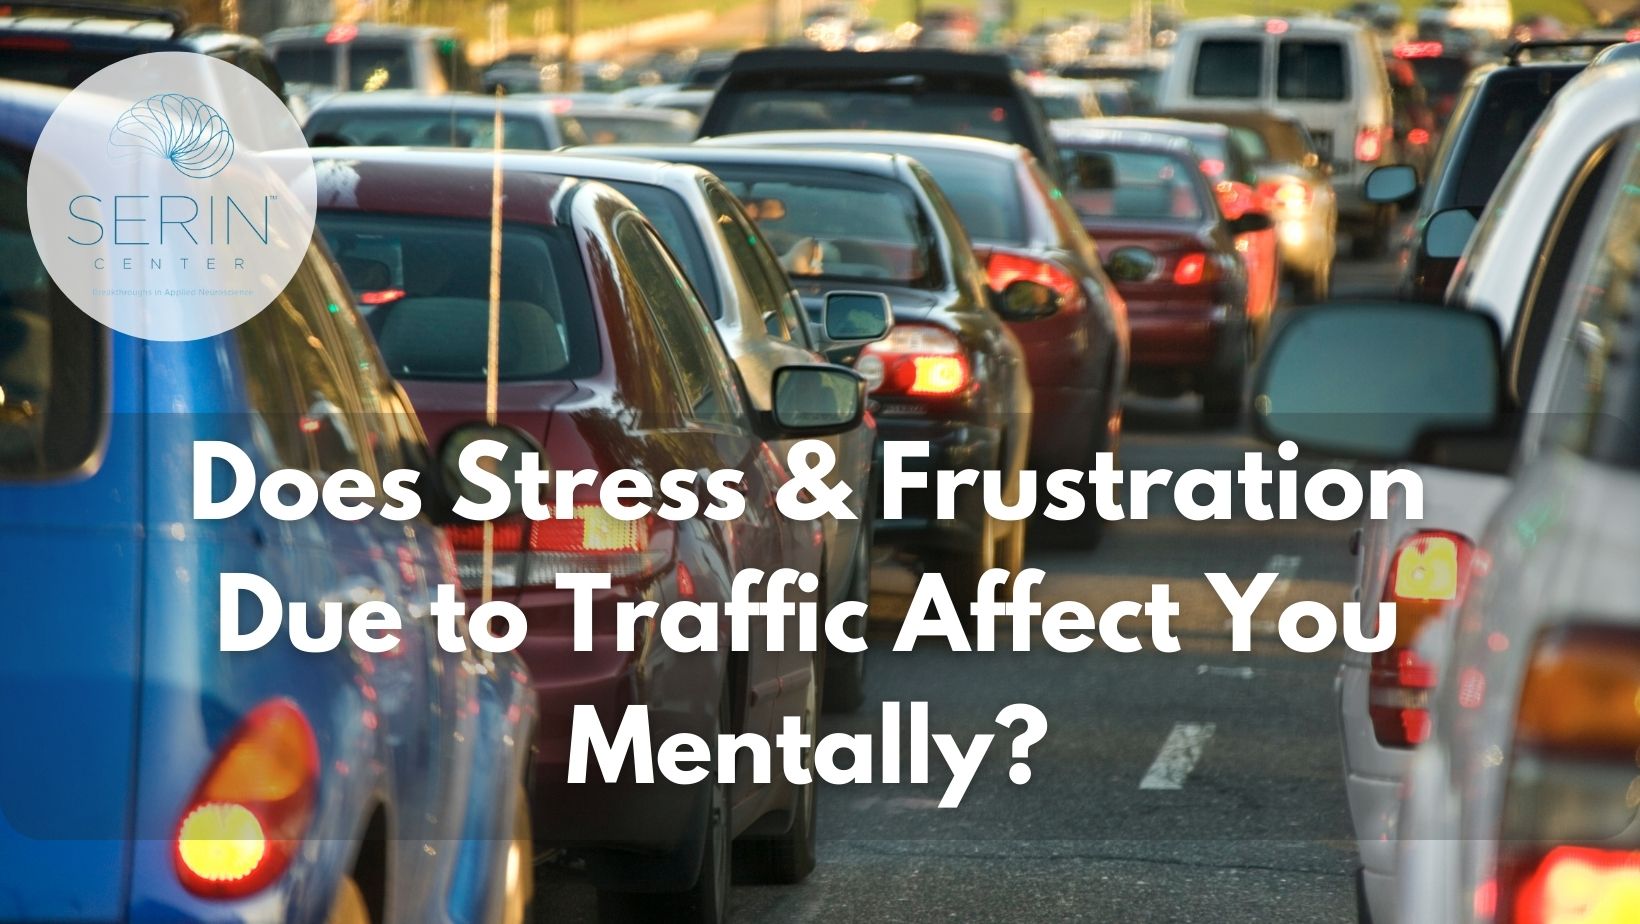 traffic and stress - Serin Center